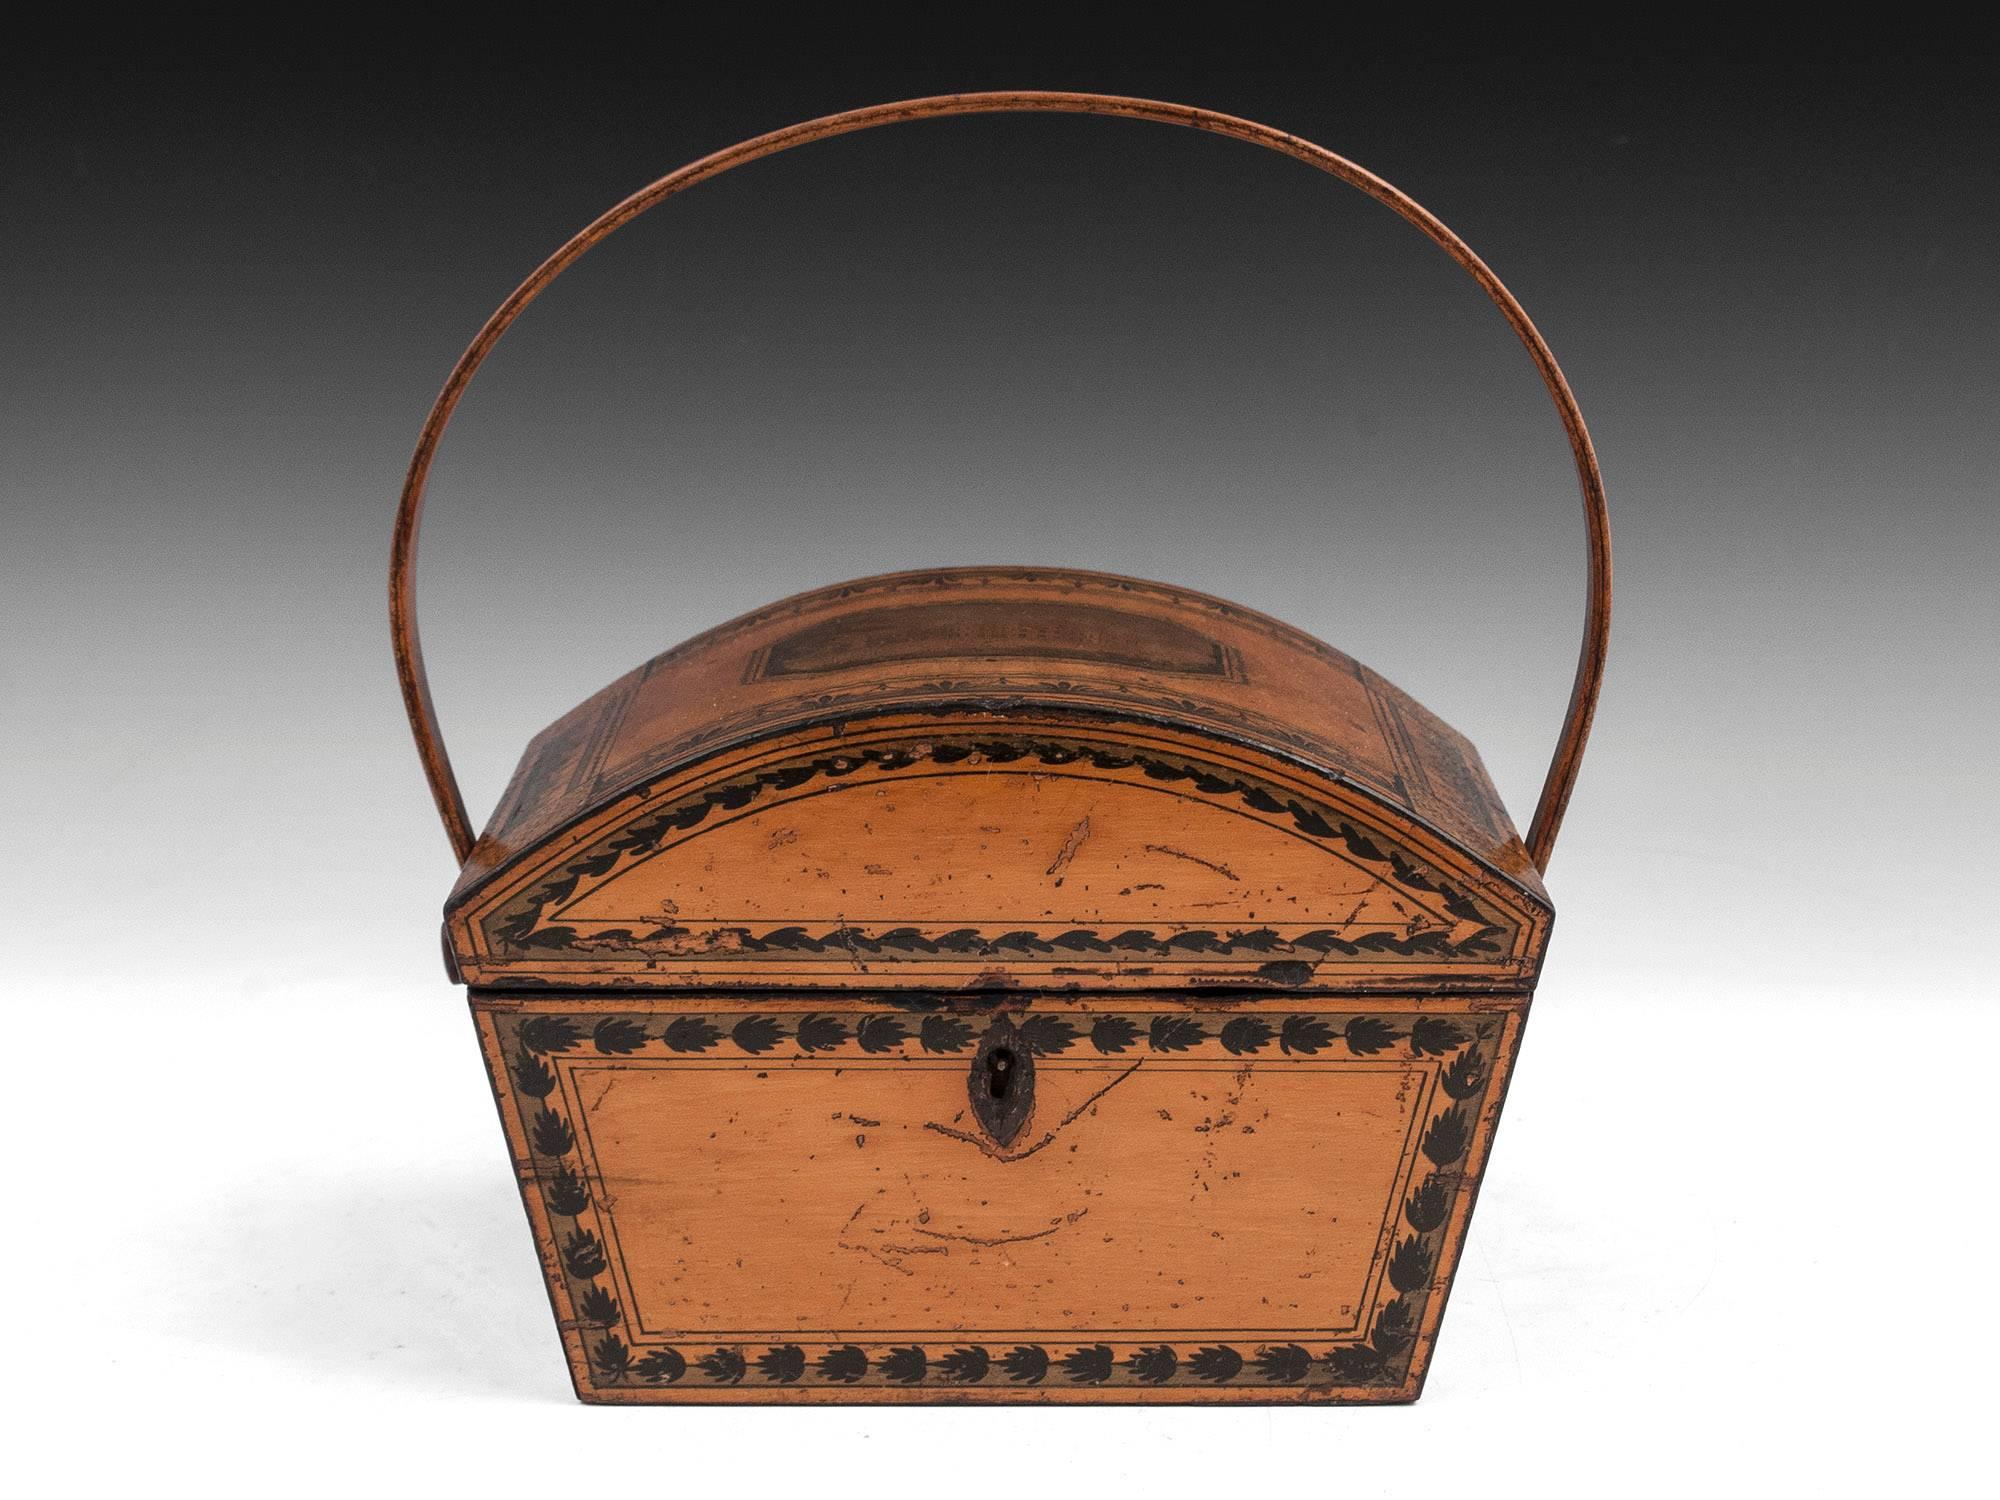 Early Tunbridge ware sewing basket, with green and black patterned borders, continuing along the handle. 

The interior is lined in blue paper and features several compartments for thread reels, thimbles, needle books and other sewing equipment